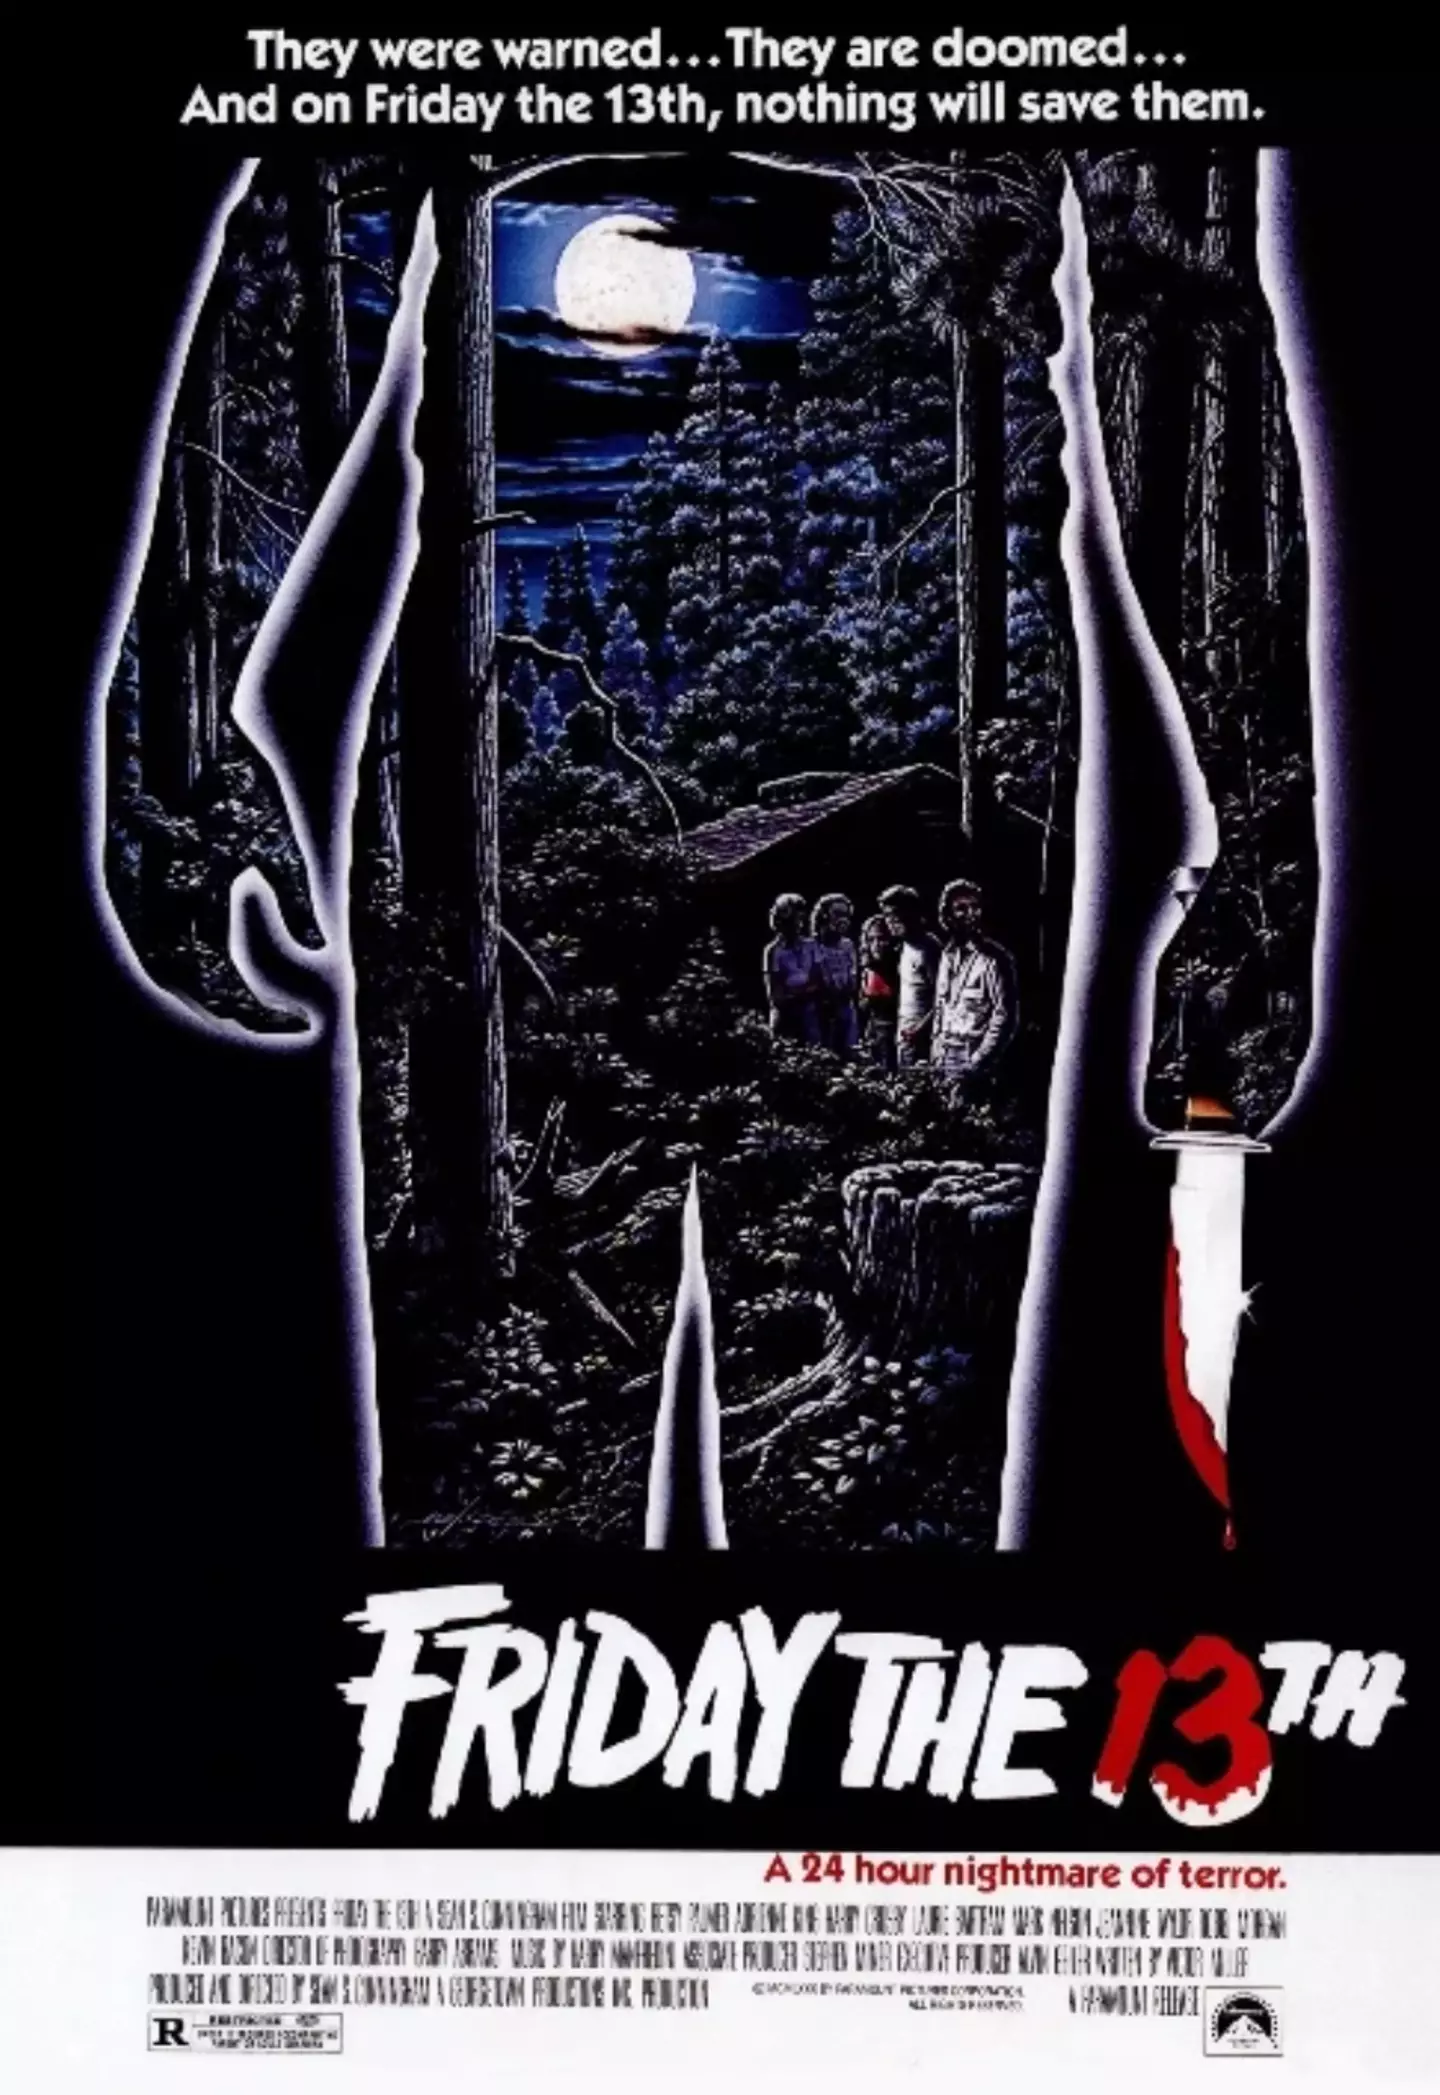 Everyone has their guard up on Friday the 13th.